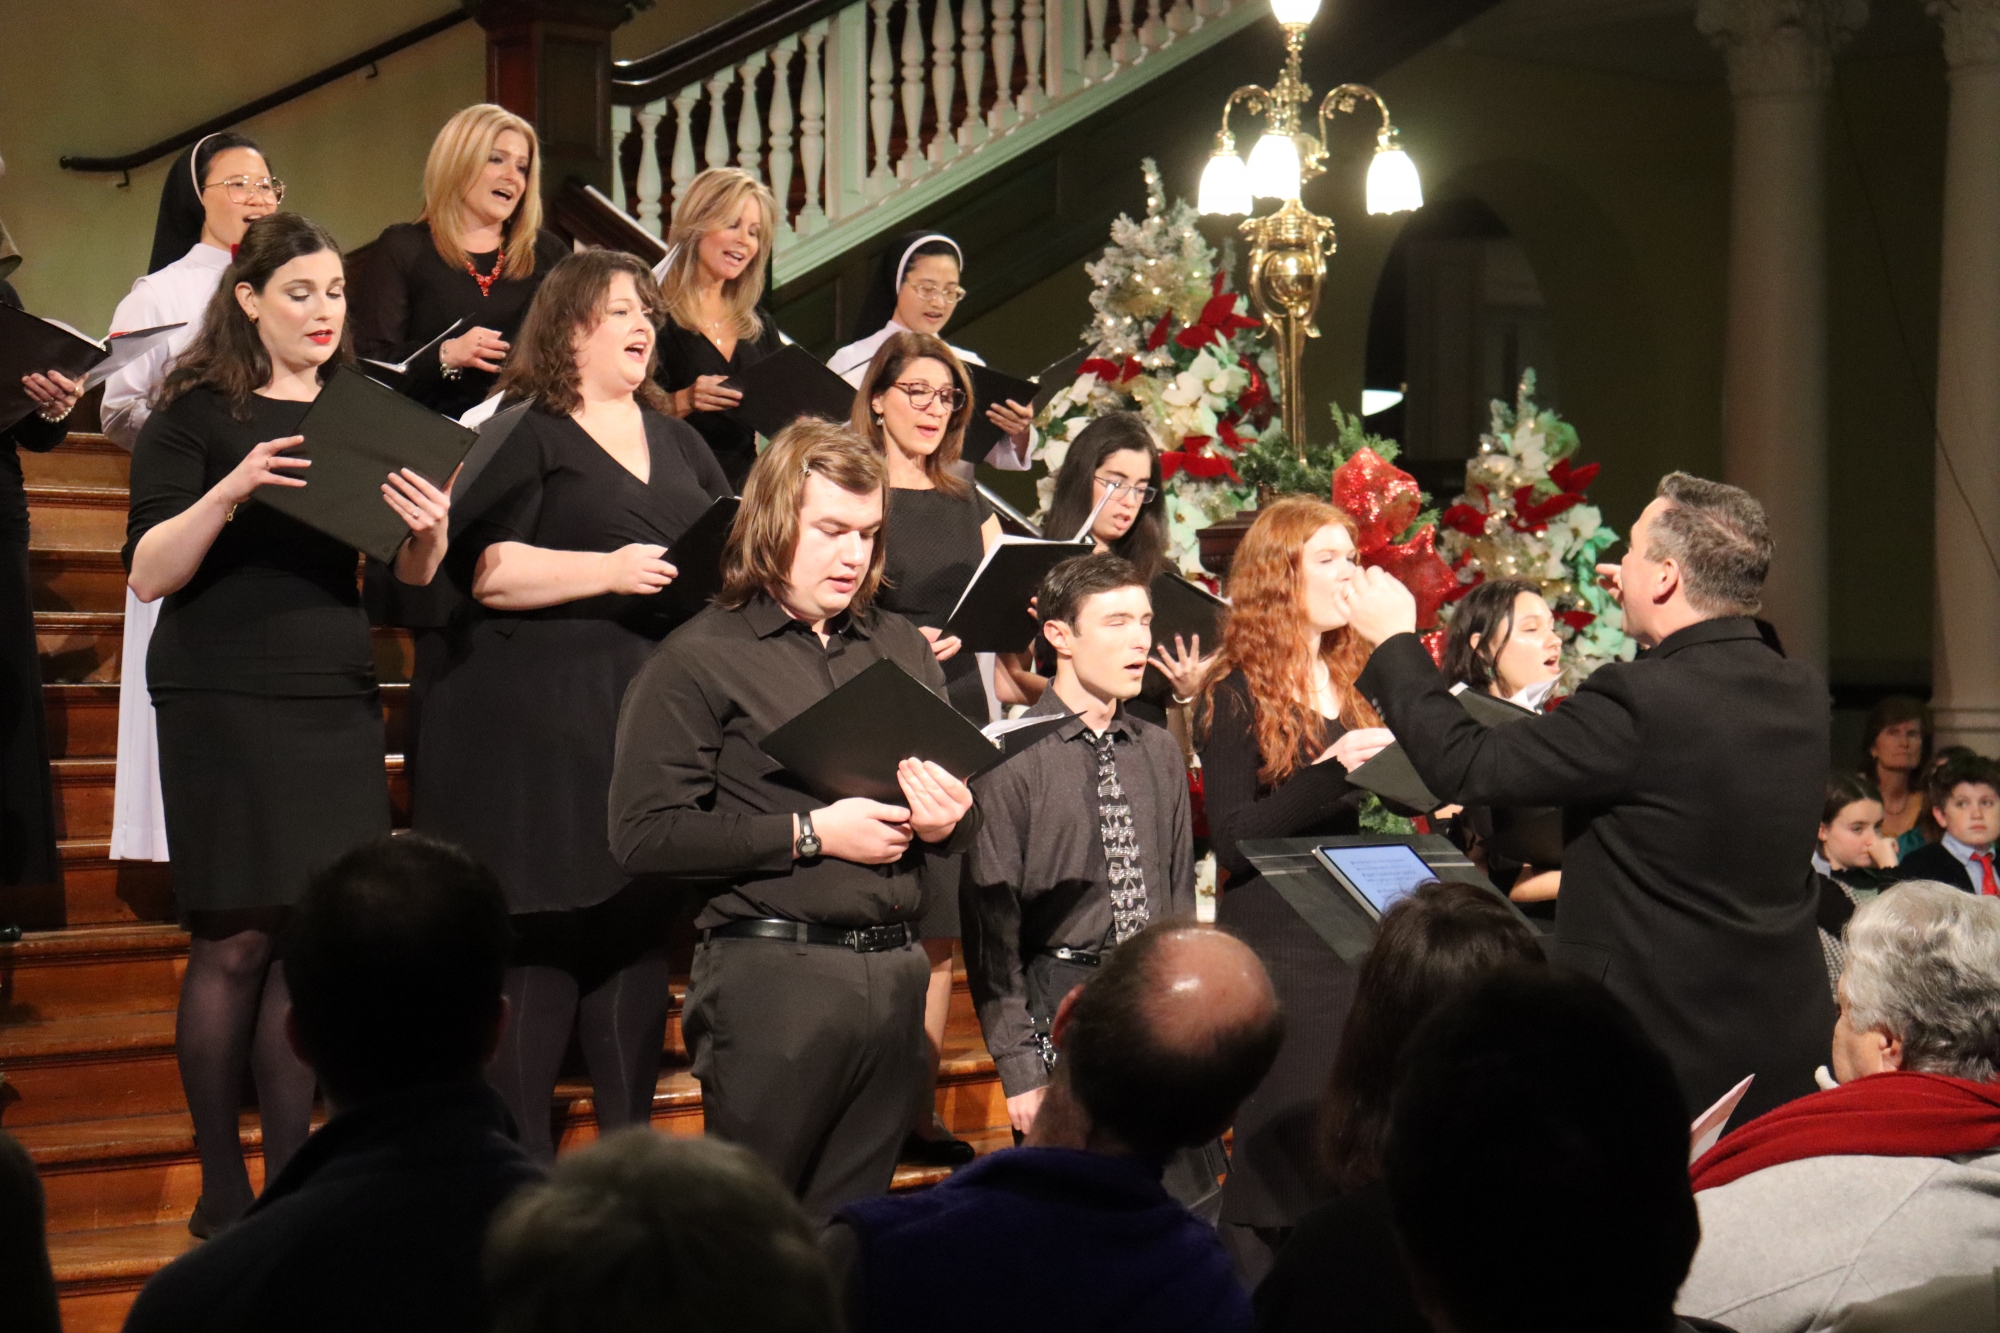 The Hill Singers performed beautiful renditions, both vocally and instrumentally, during the Annual Carol Night.